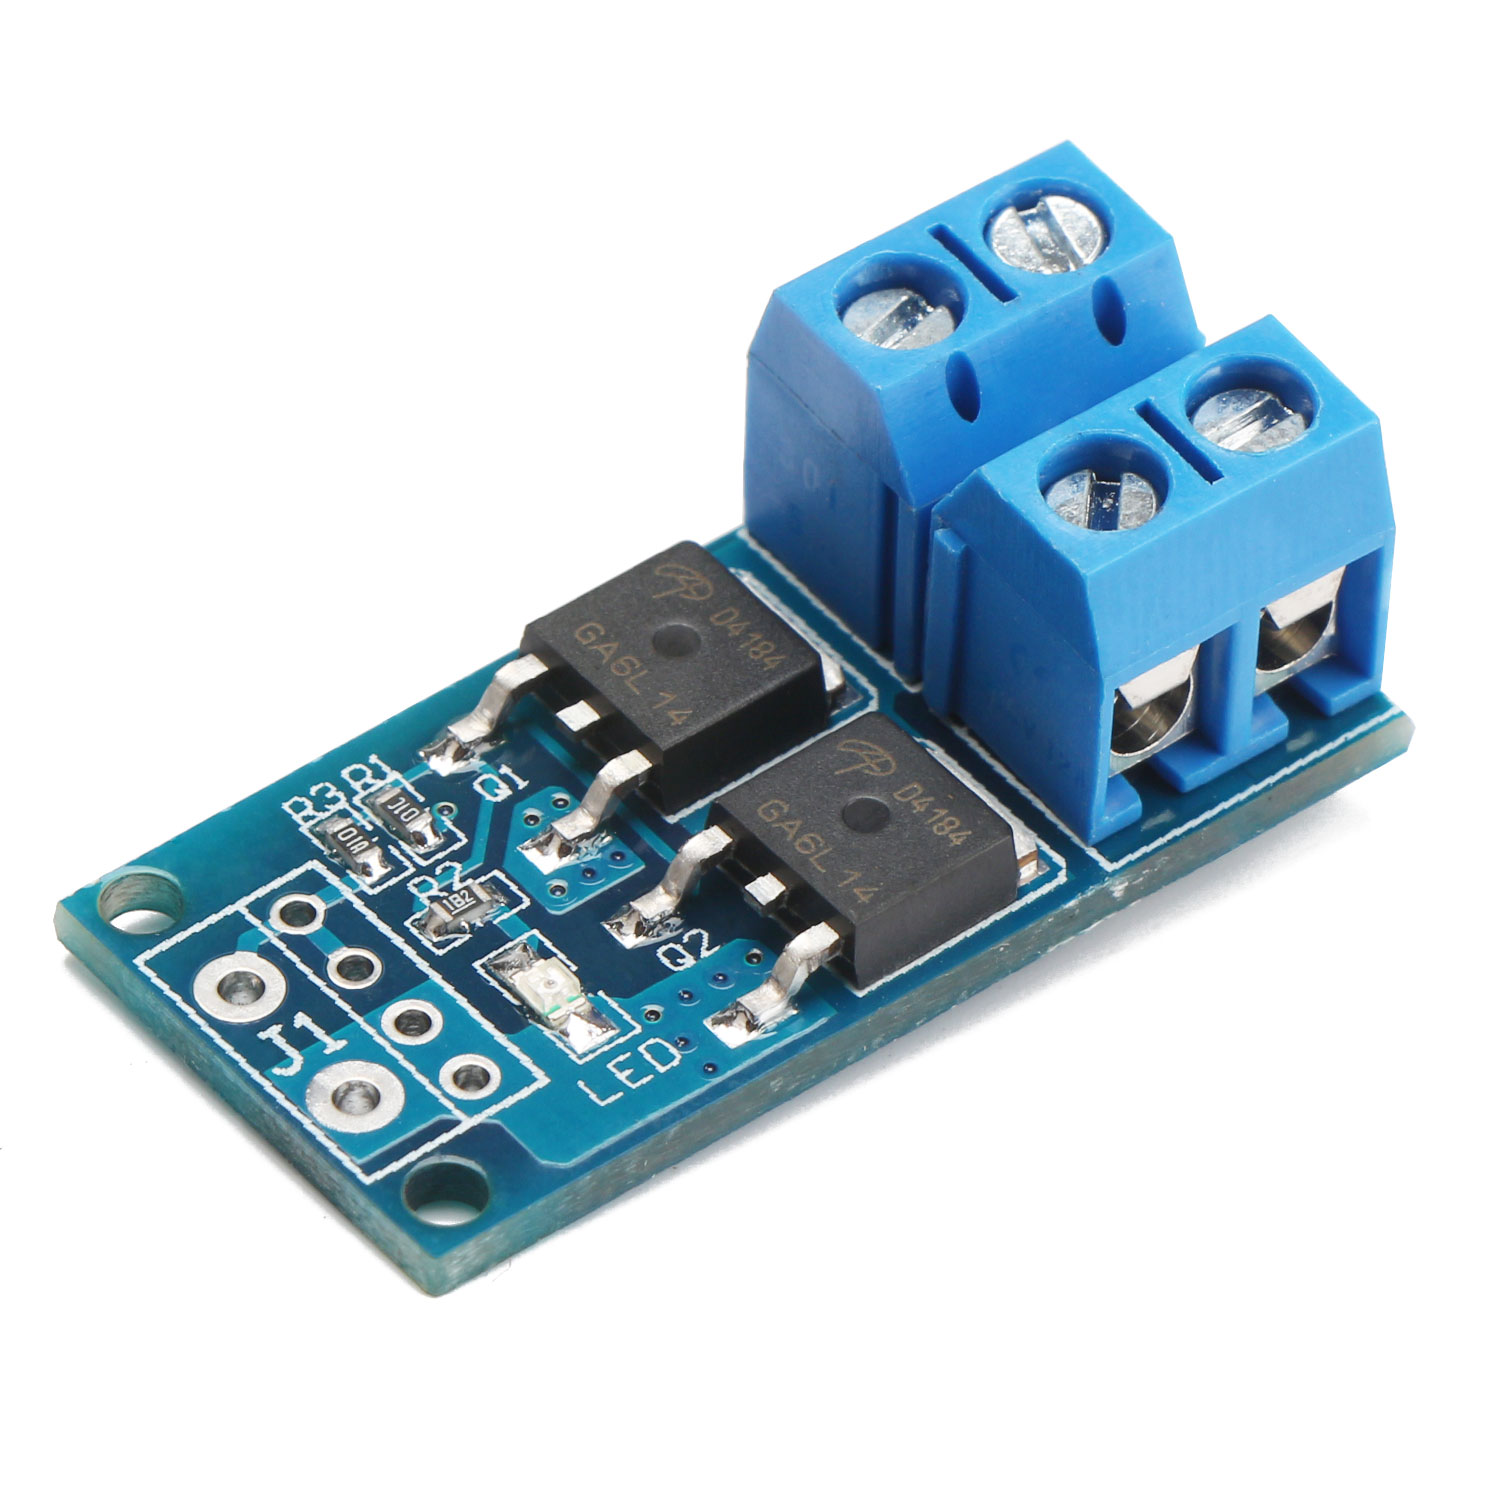 Max 30A 400W Dual High-Power MOSFET Trigger Switch Drive Module 0-20KHz PWM Adjustment Electronic Switch Control Board Motor Speed Control Lamp Brightness Control Anmbest 5PCS DC 5V-36V 15A 